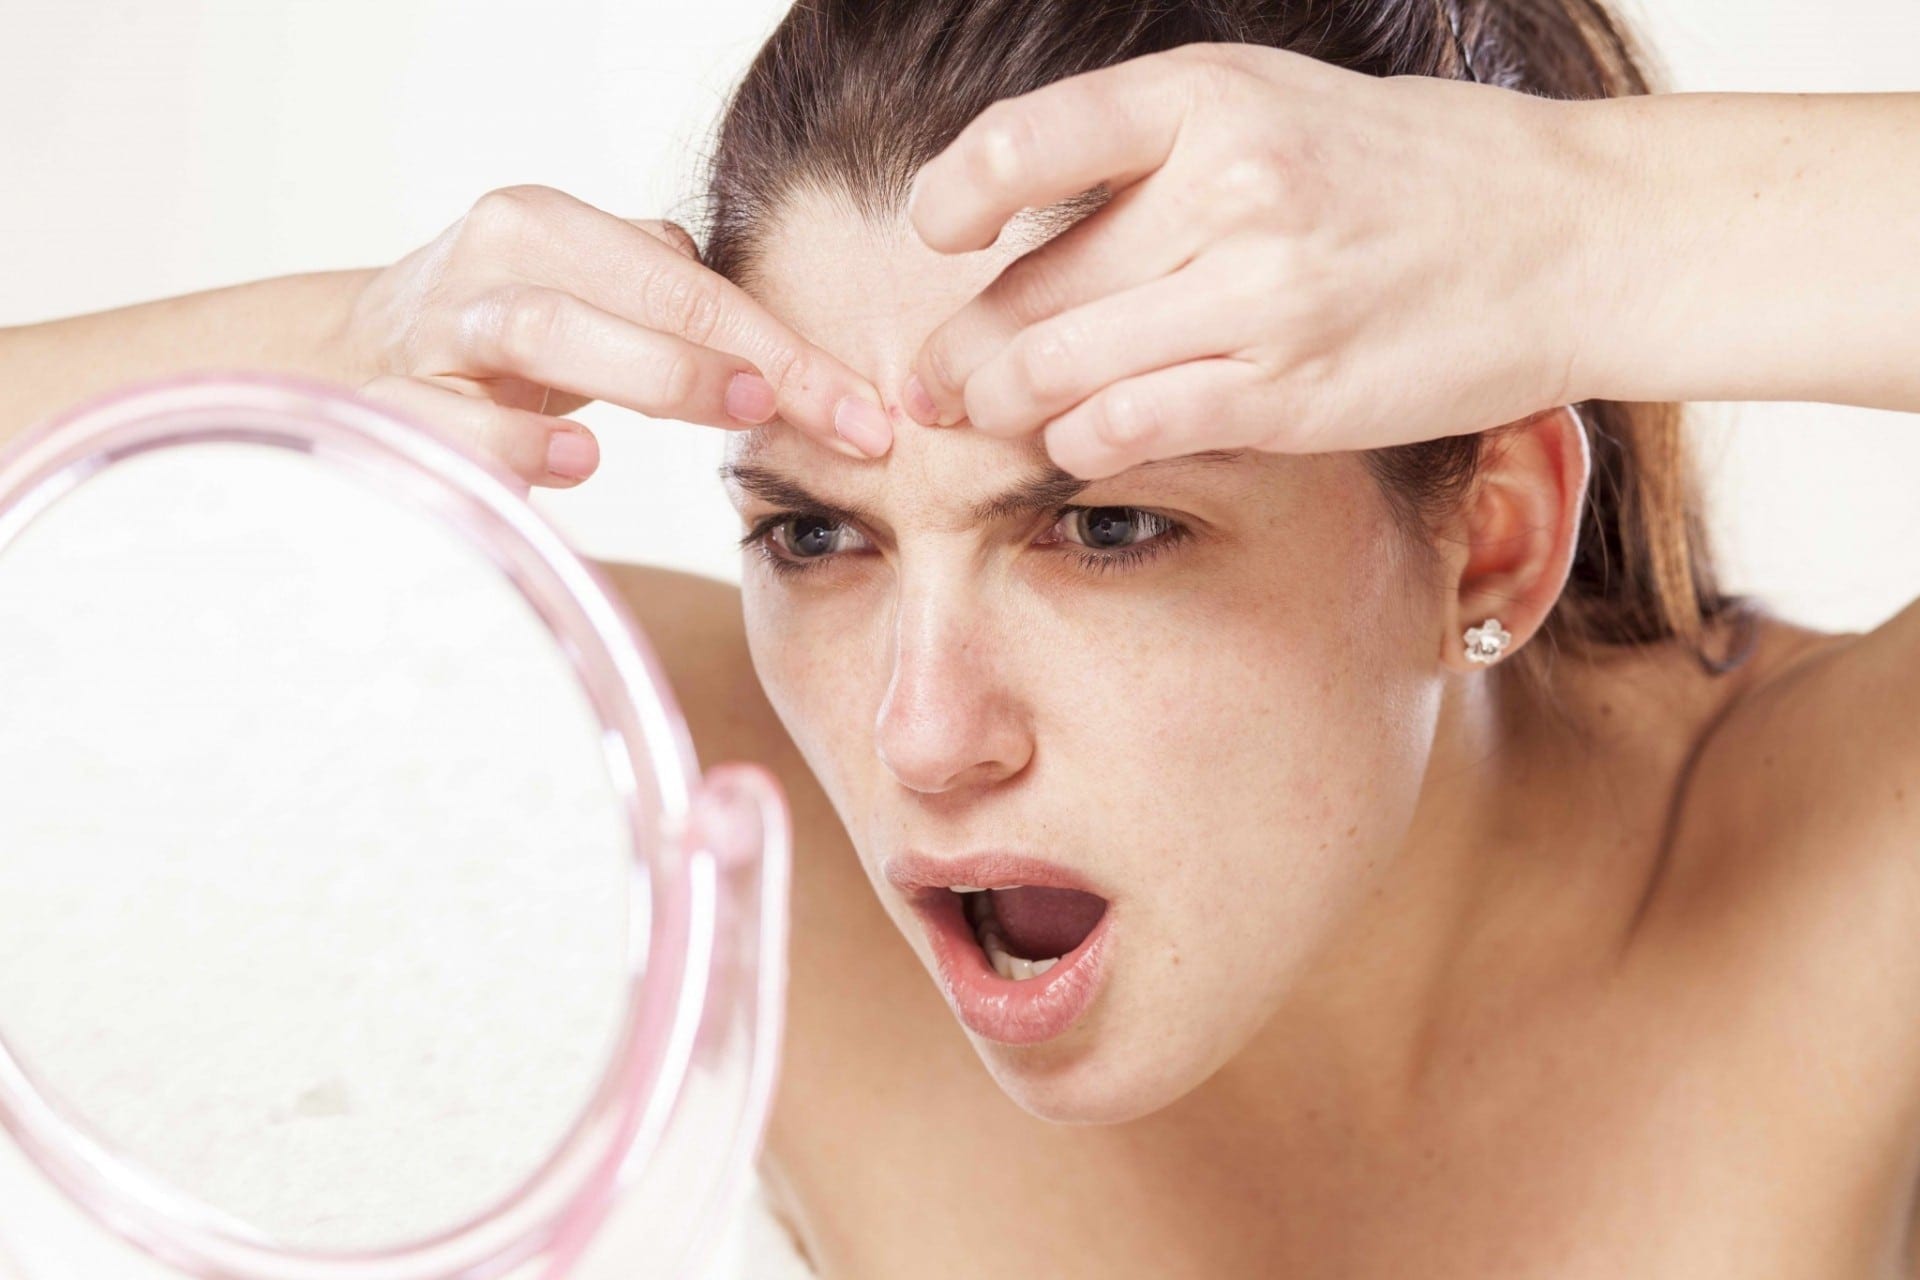 Young Woman Squeeze Her Acne In Front Of The Mirror